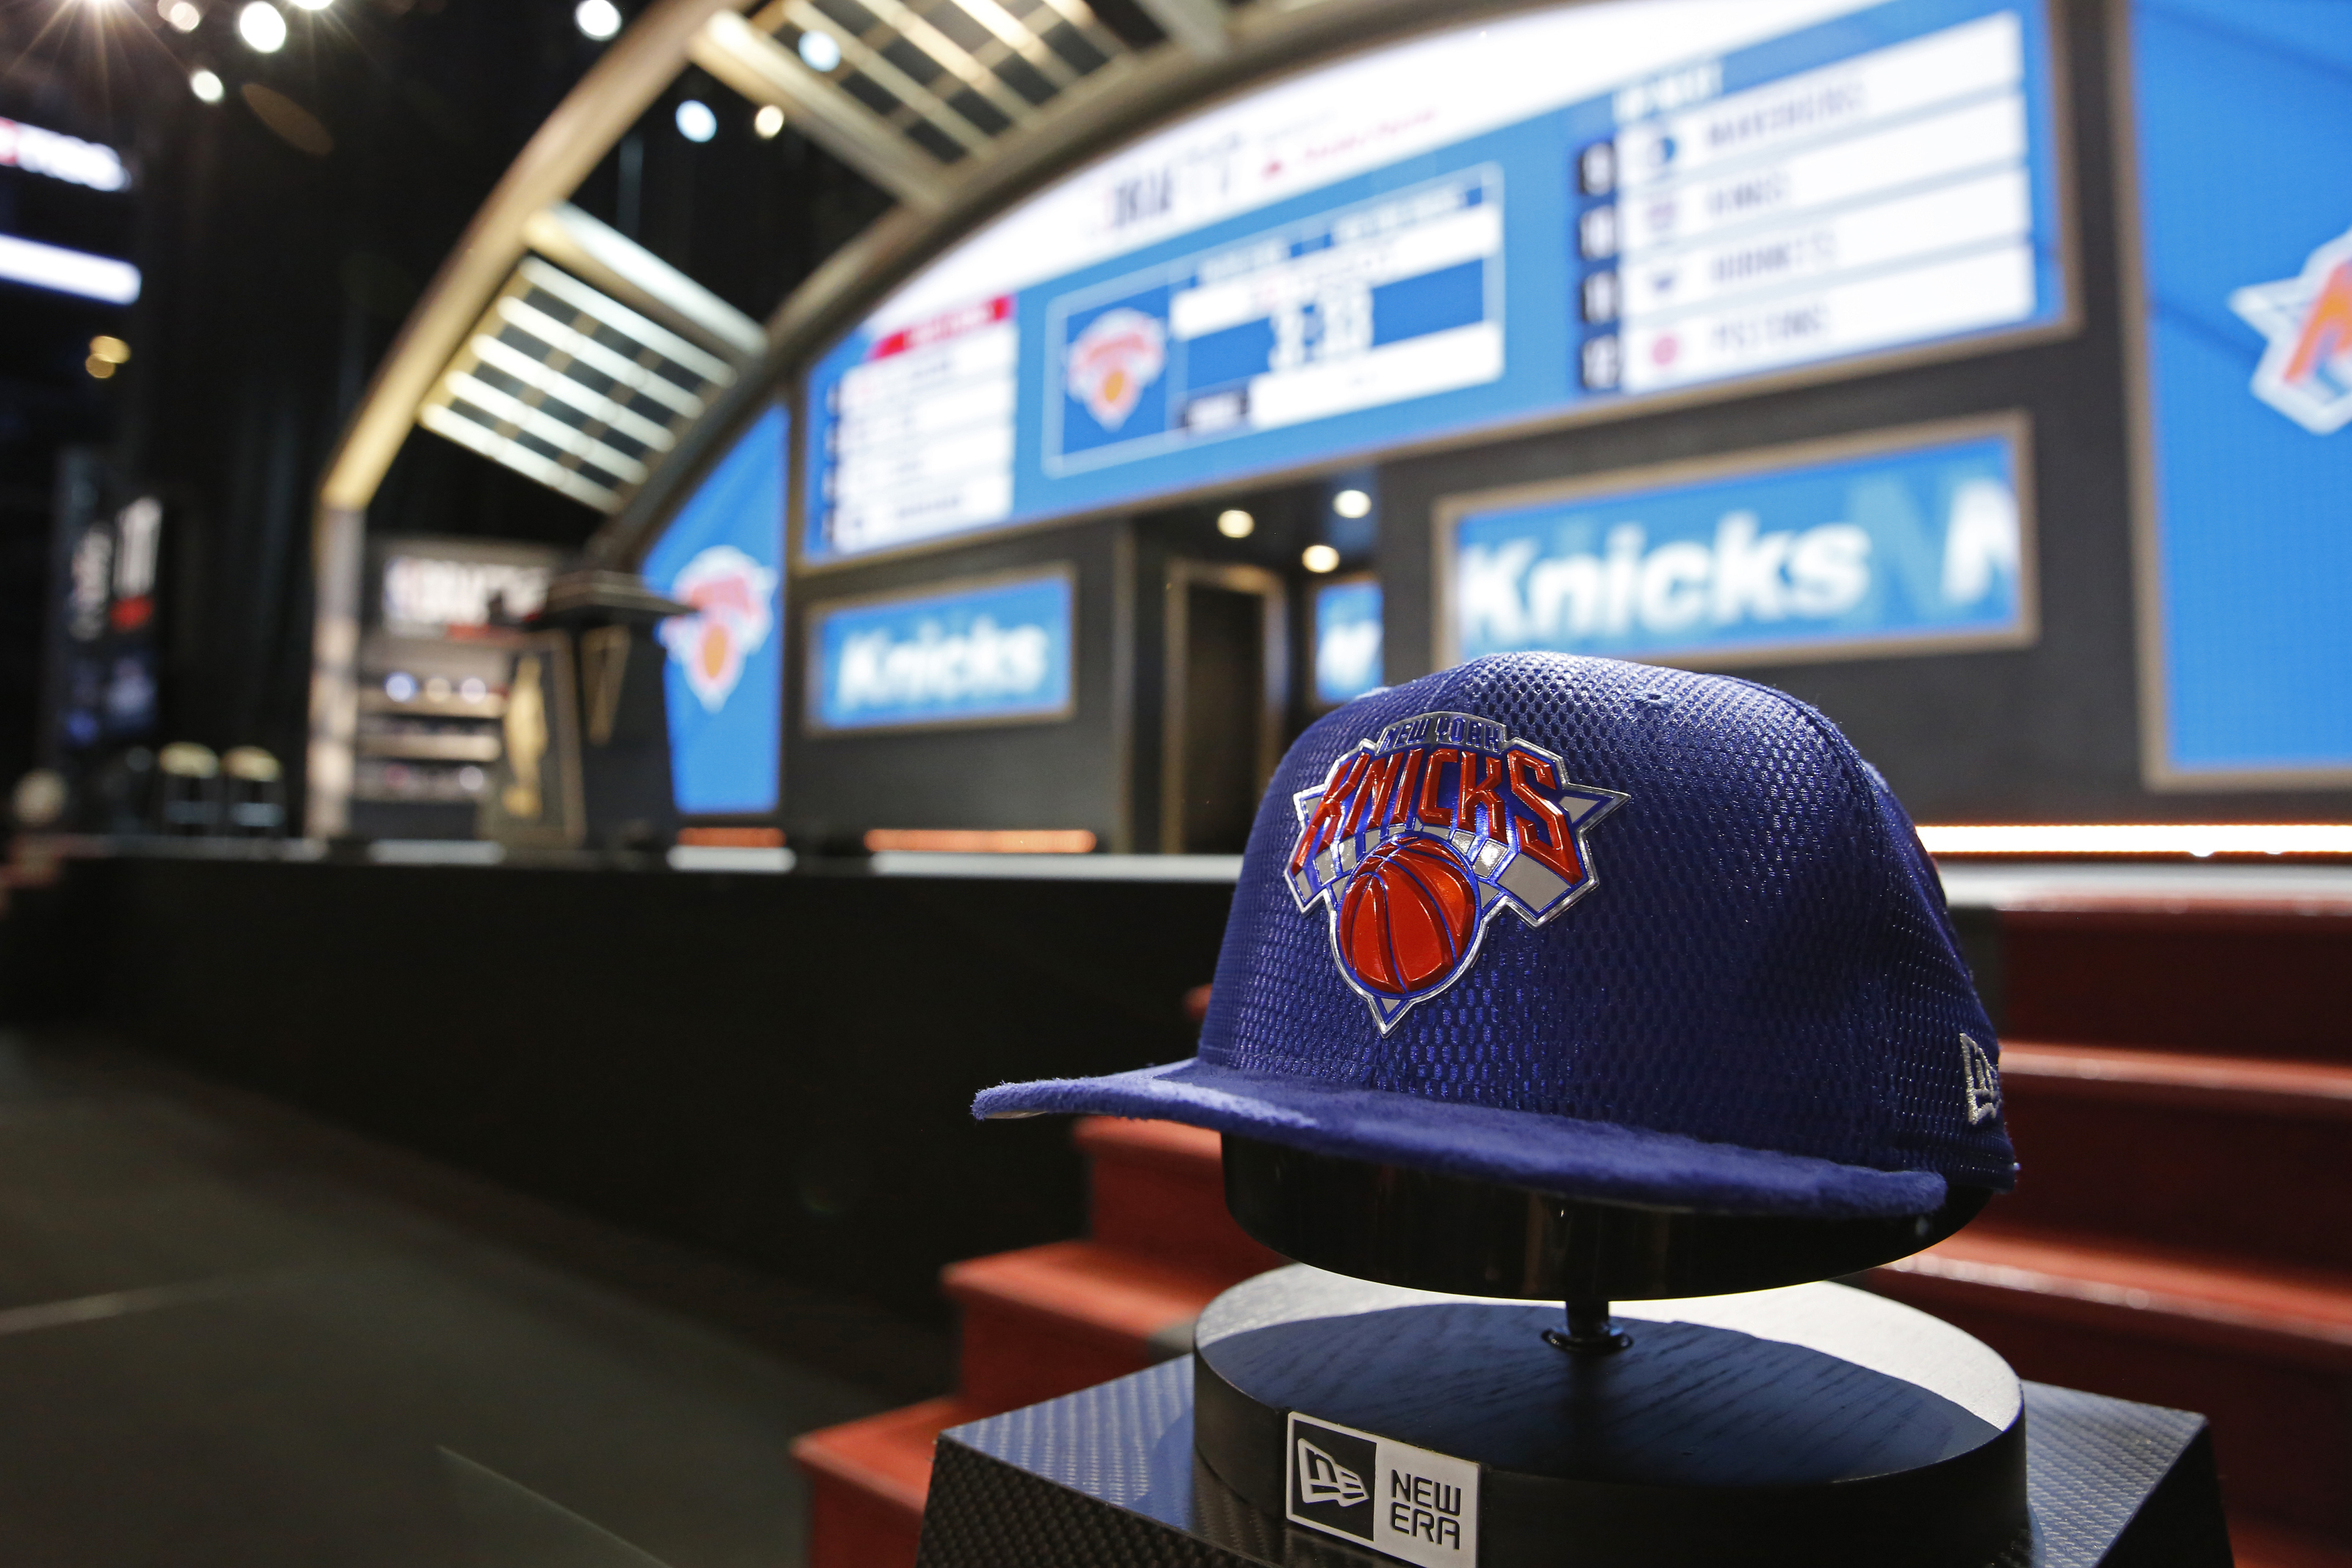 New York Knicks hope to get lucky in the 2018 NBA Draft Lottery